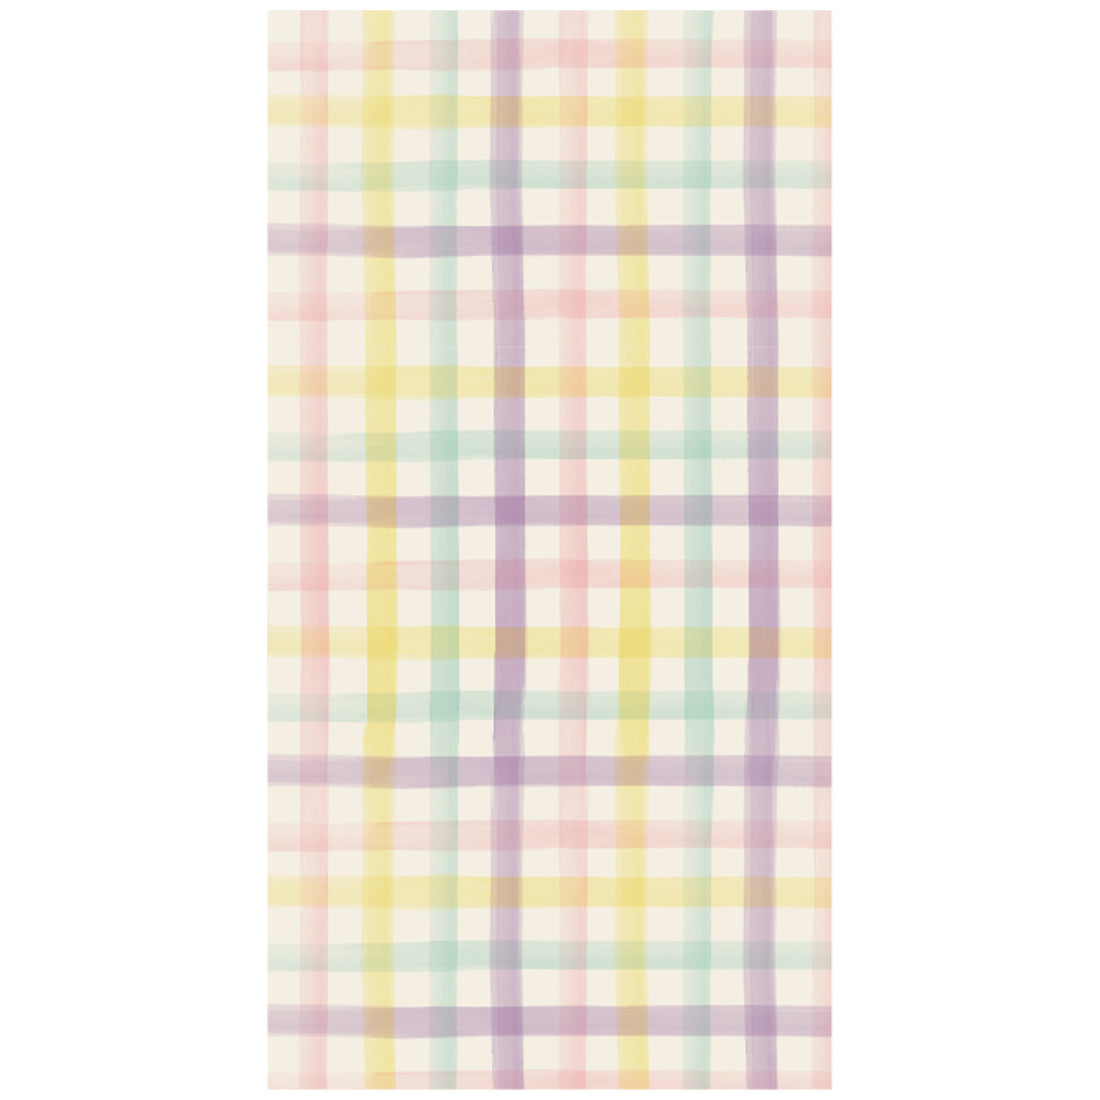 A Spring Plaid Napkins by Hester &amp; Cook on a white background.